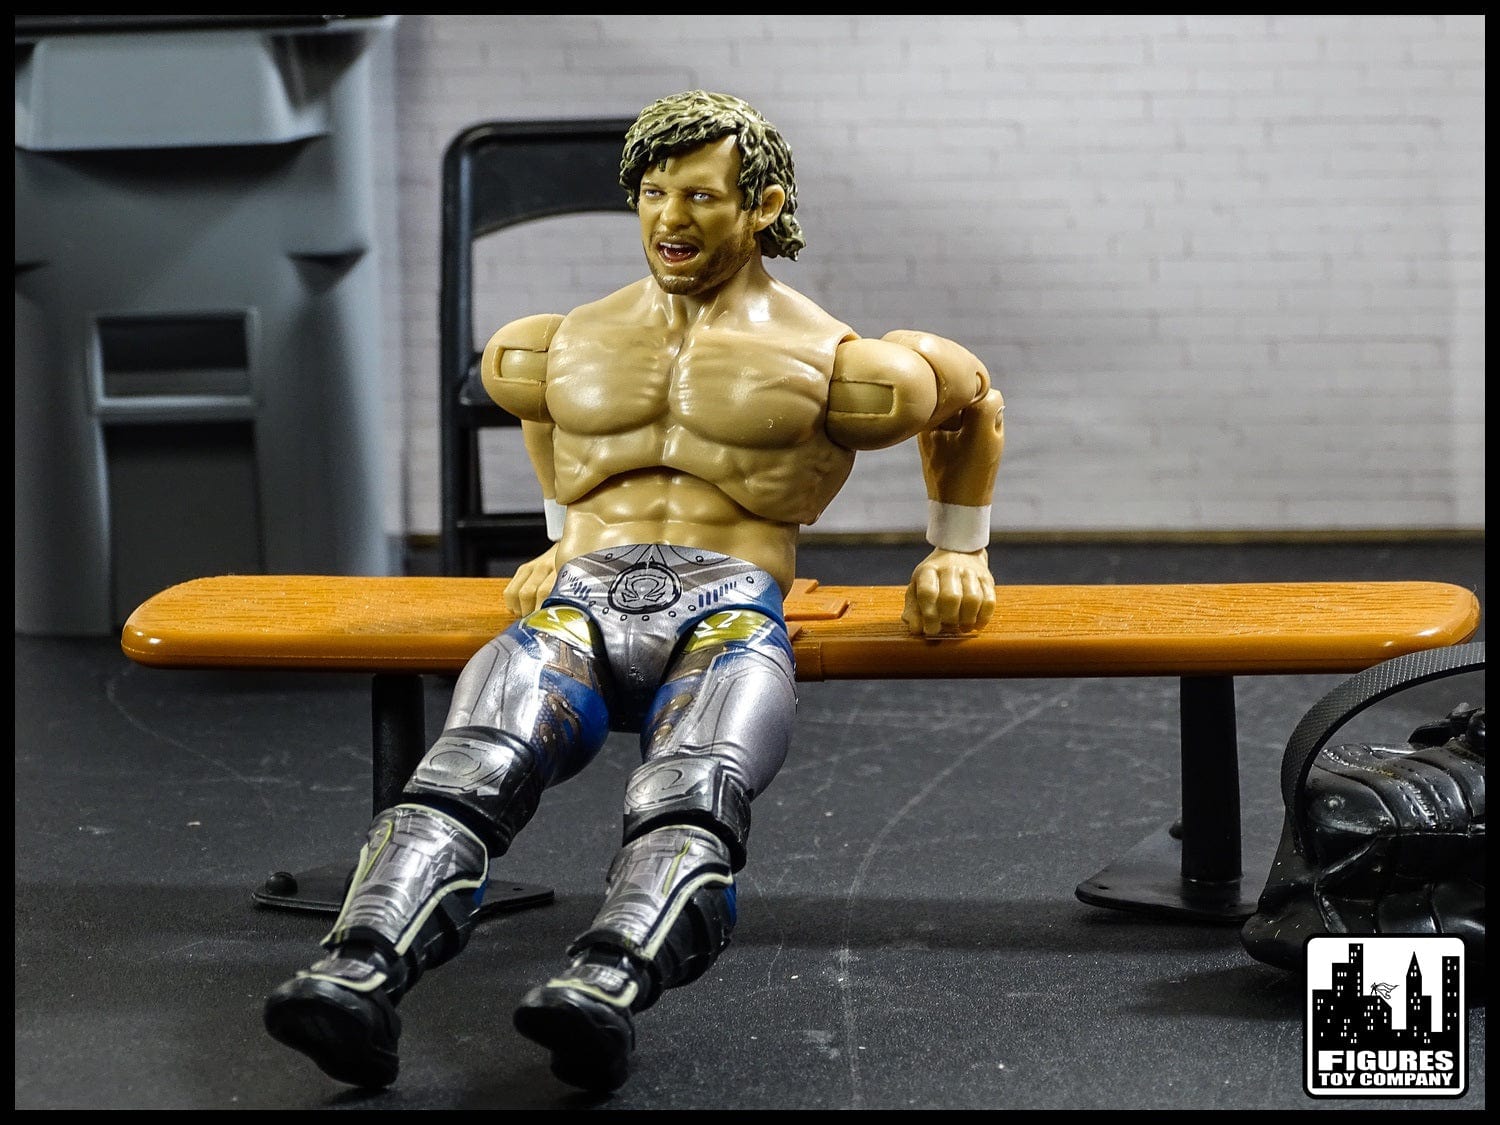 Wrestling Action Figure Accessories for WWE & AEW Action Figures - Figures  Toy Company